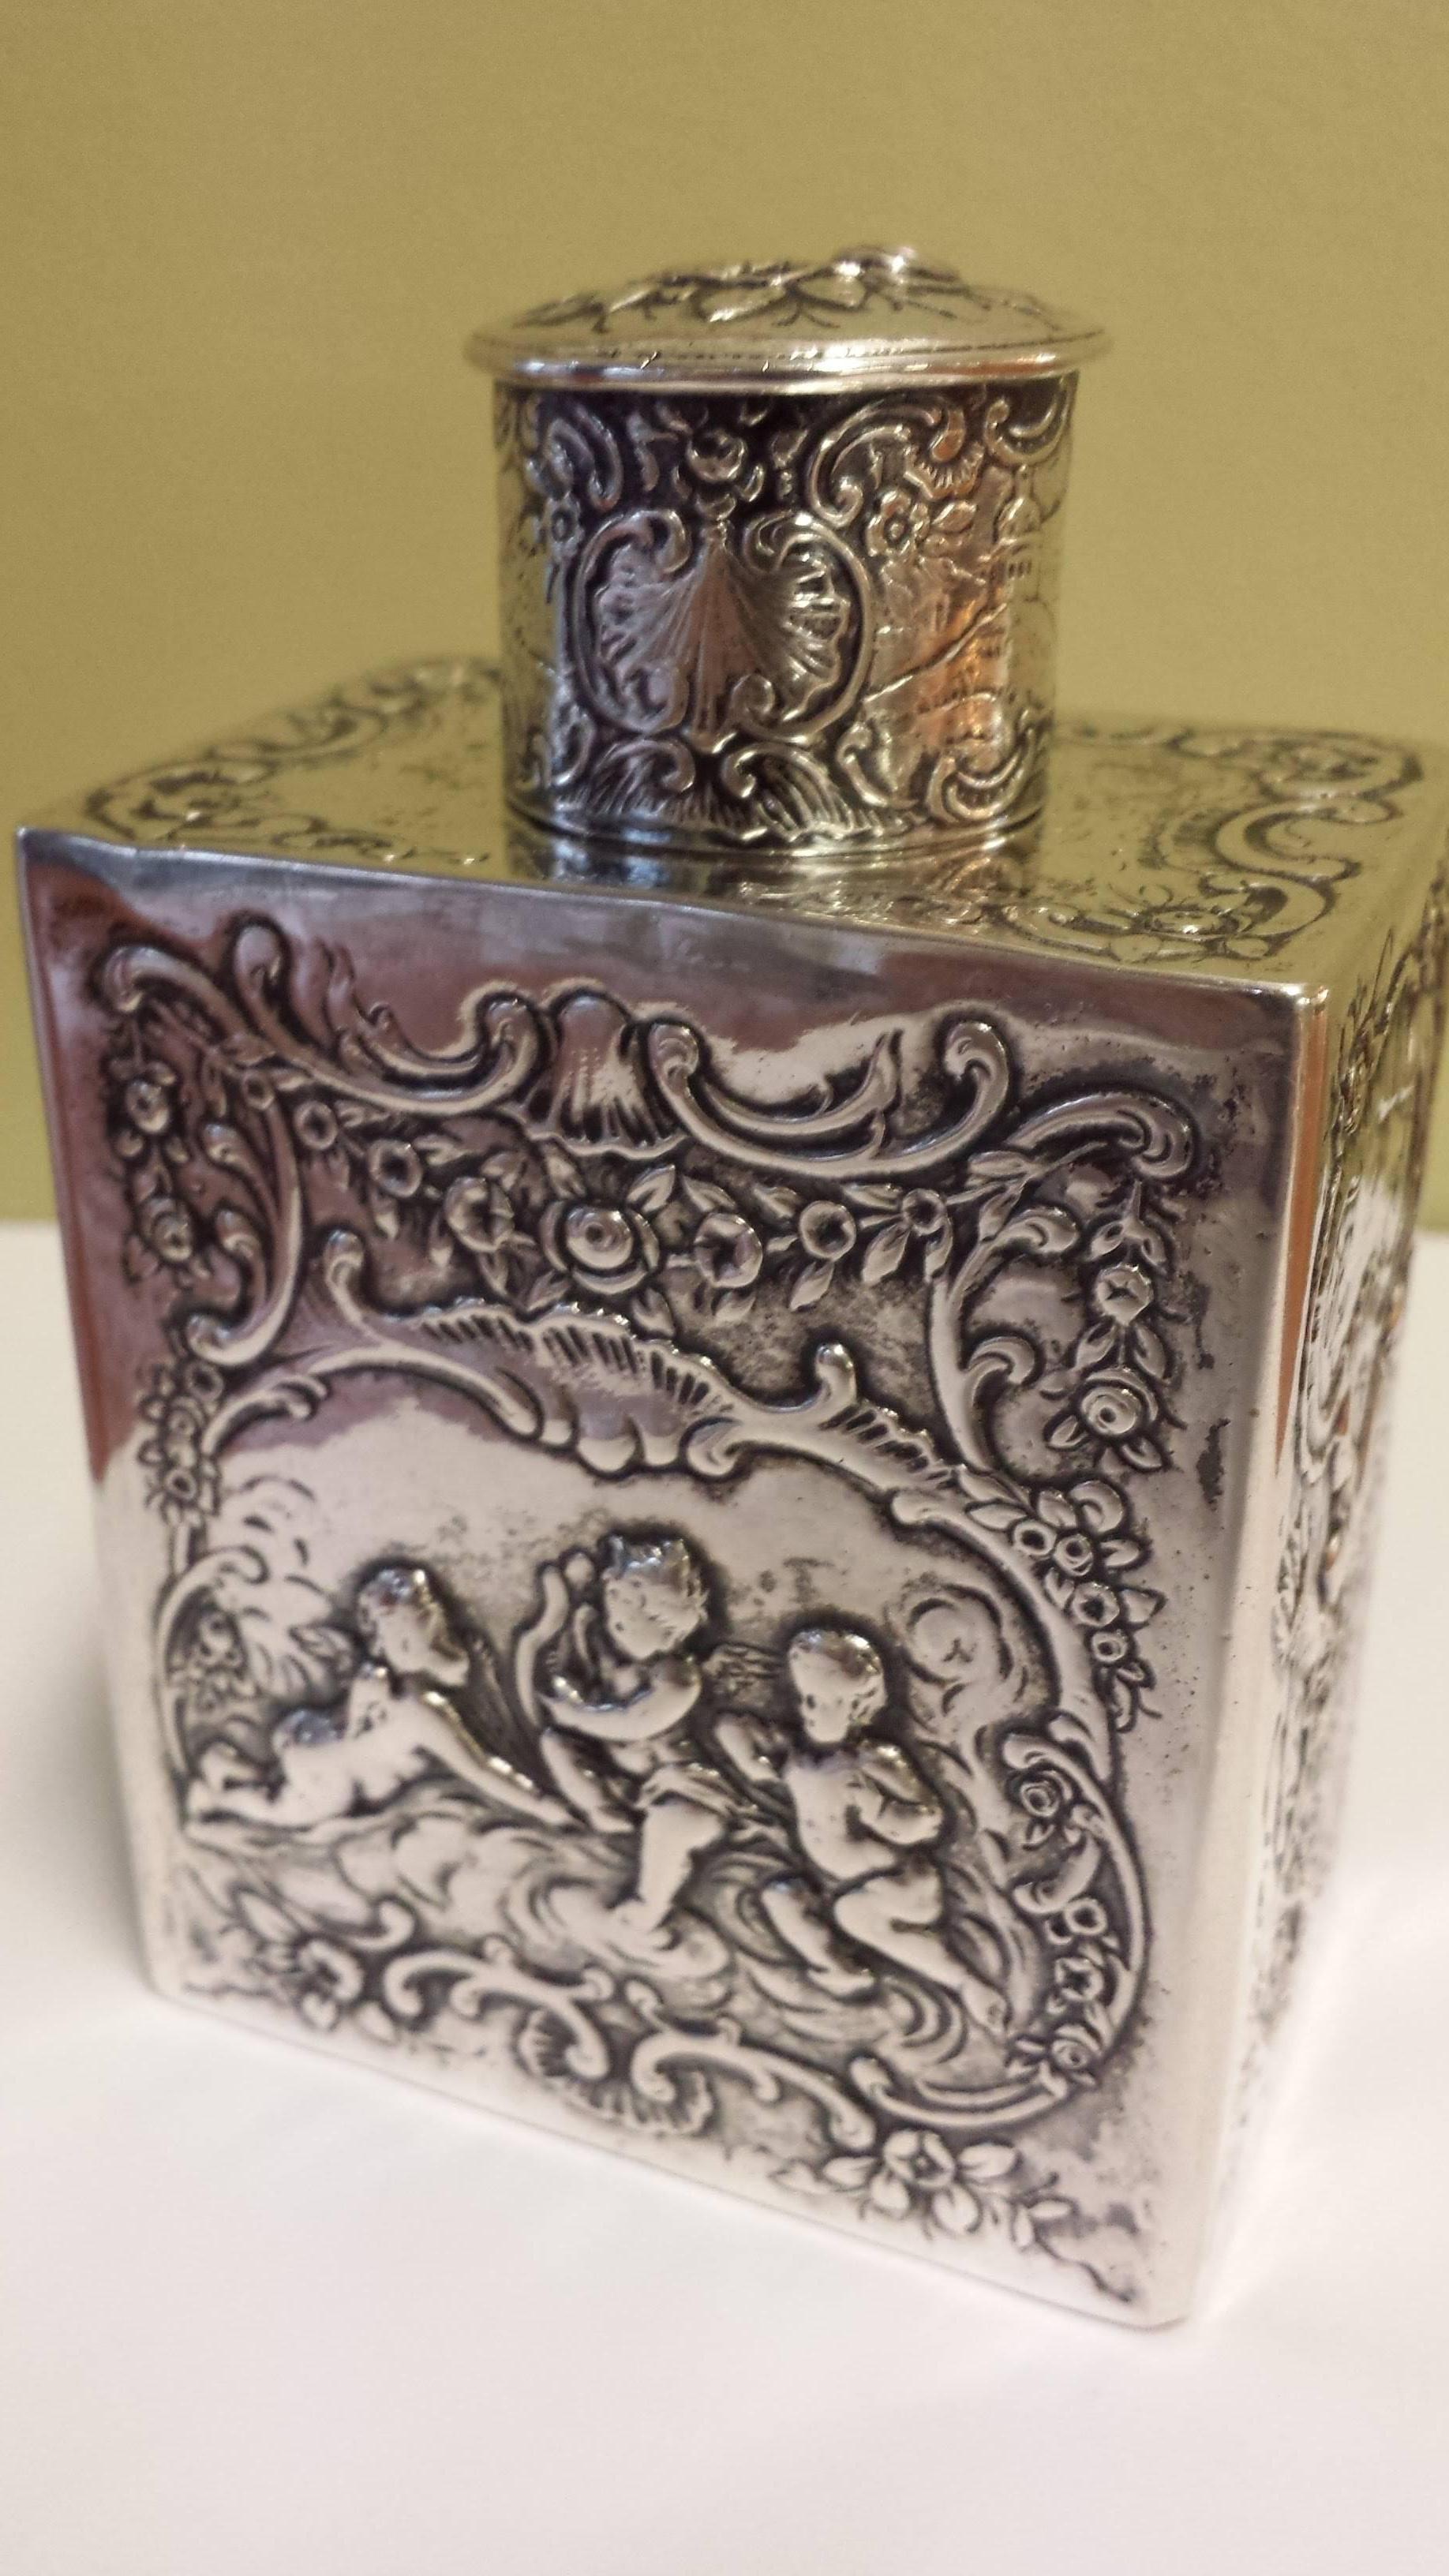 Renaissance Swedish Silver Flask or Decanter with Embossed Cherubs & Torch and Heart Design